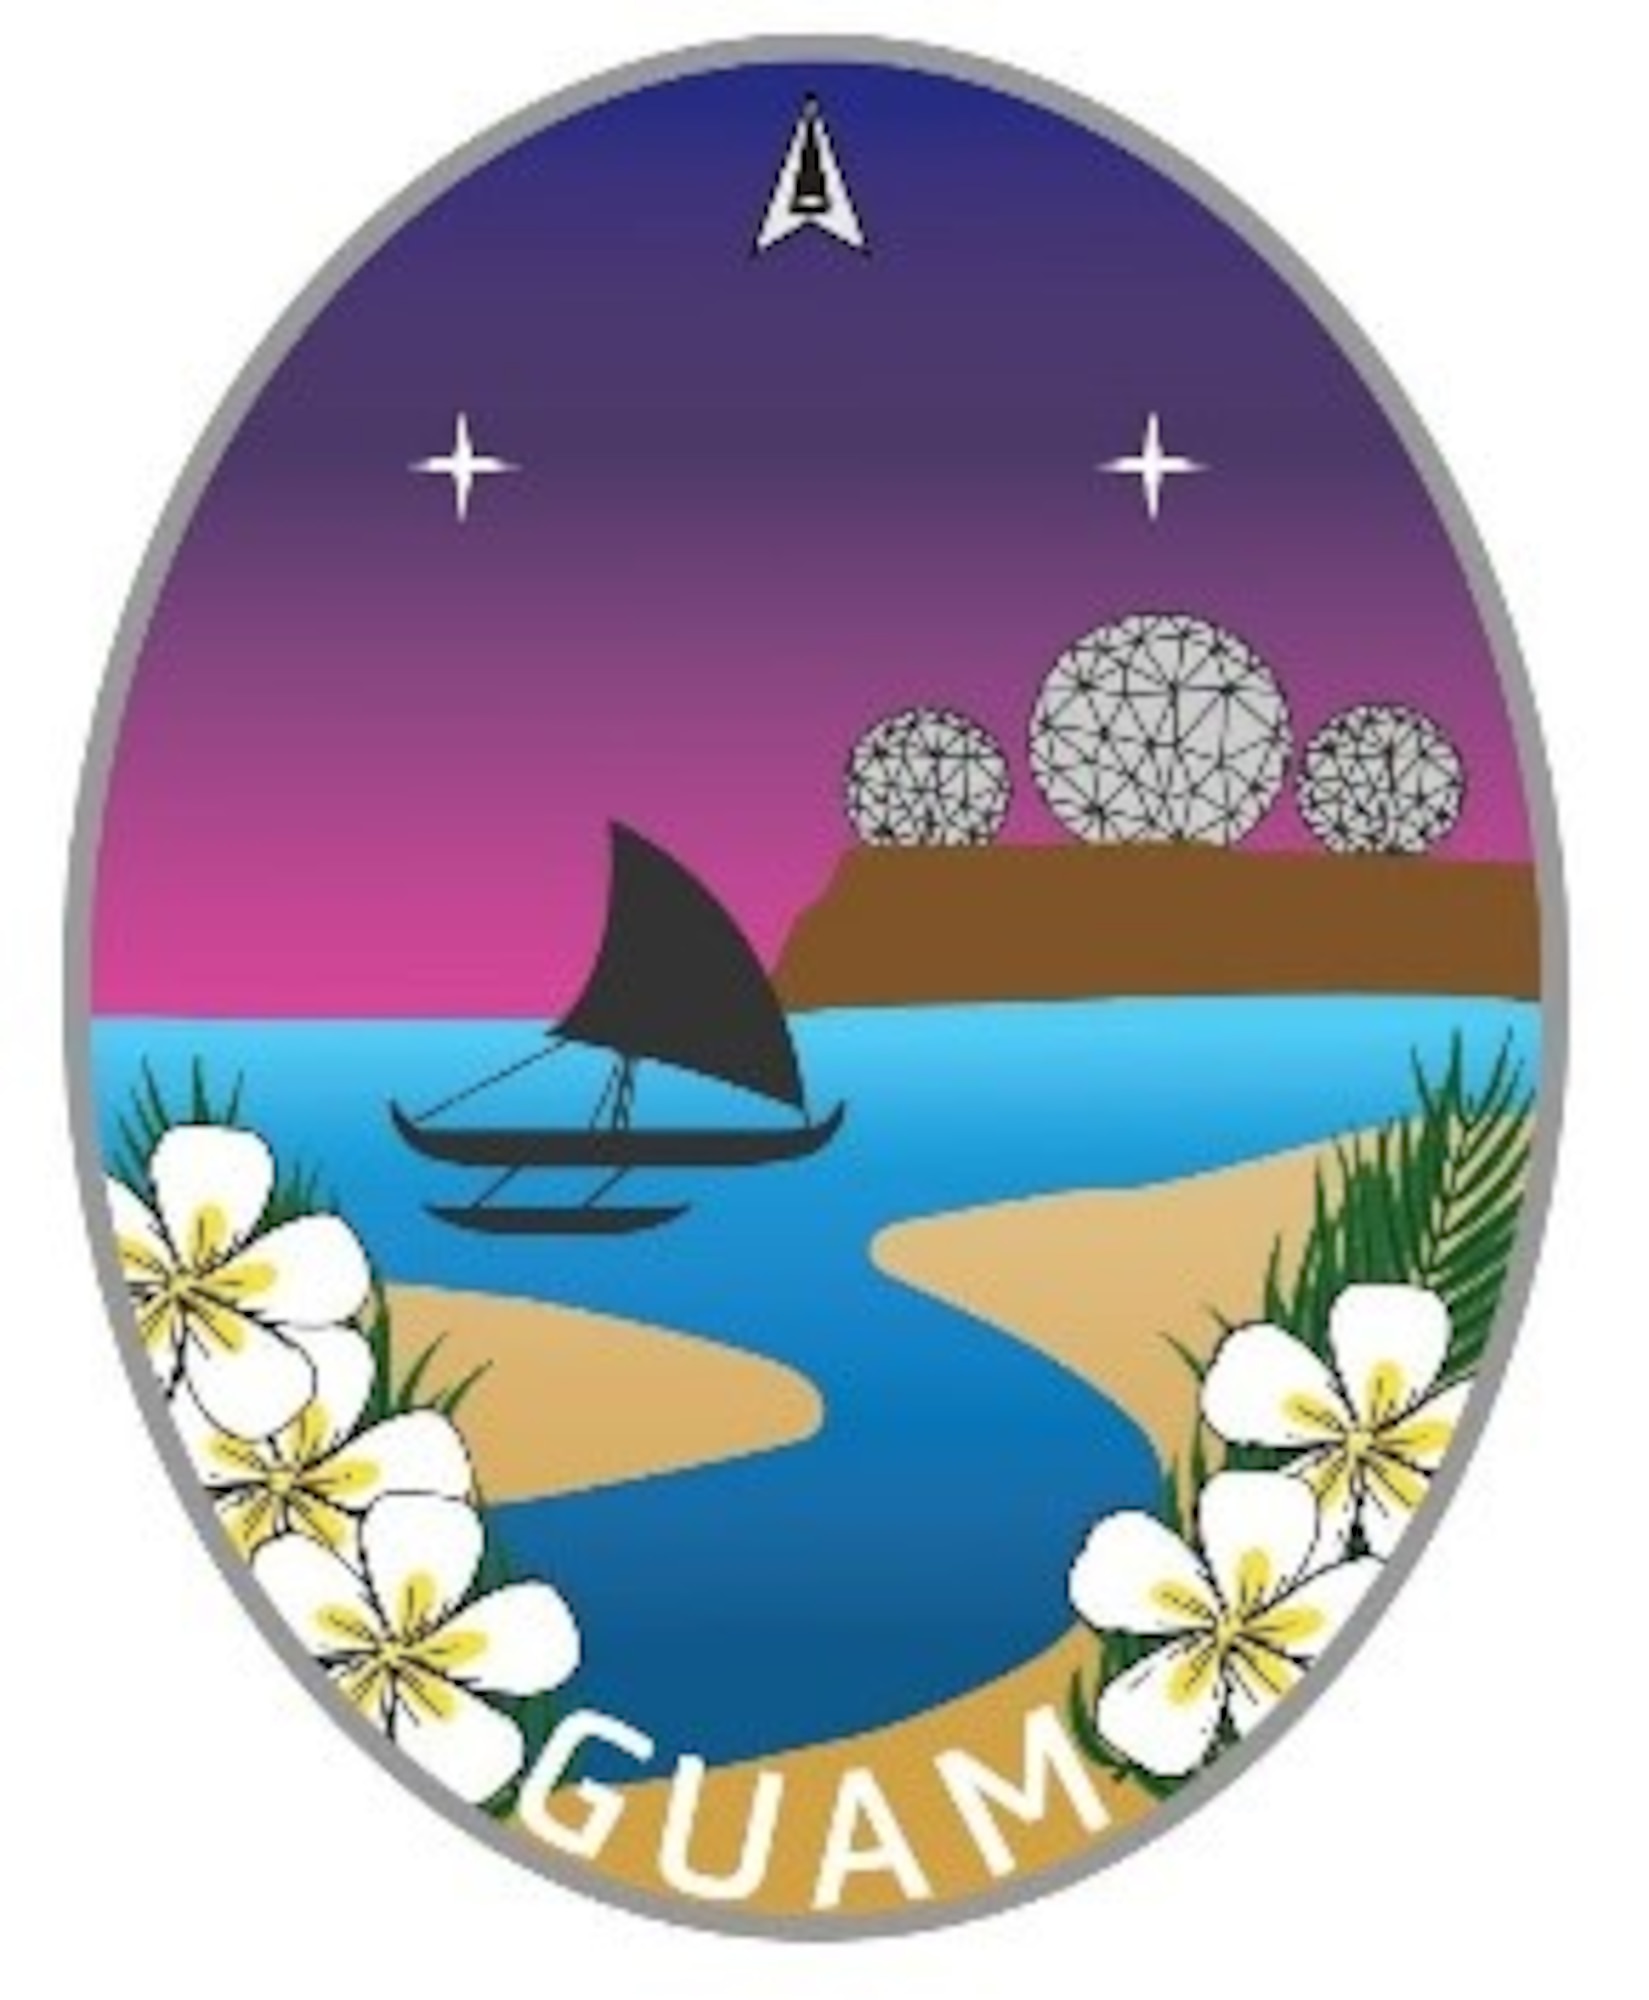 Logo of Guam landscape with boat in the ocean and radomes in the background on a mountain